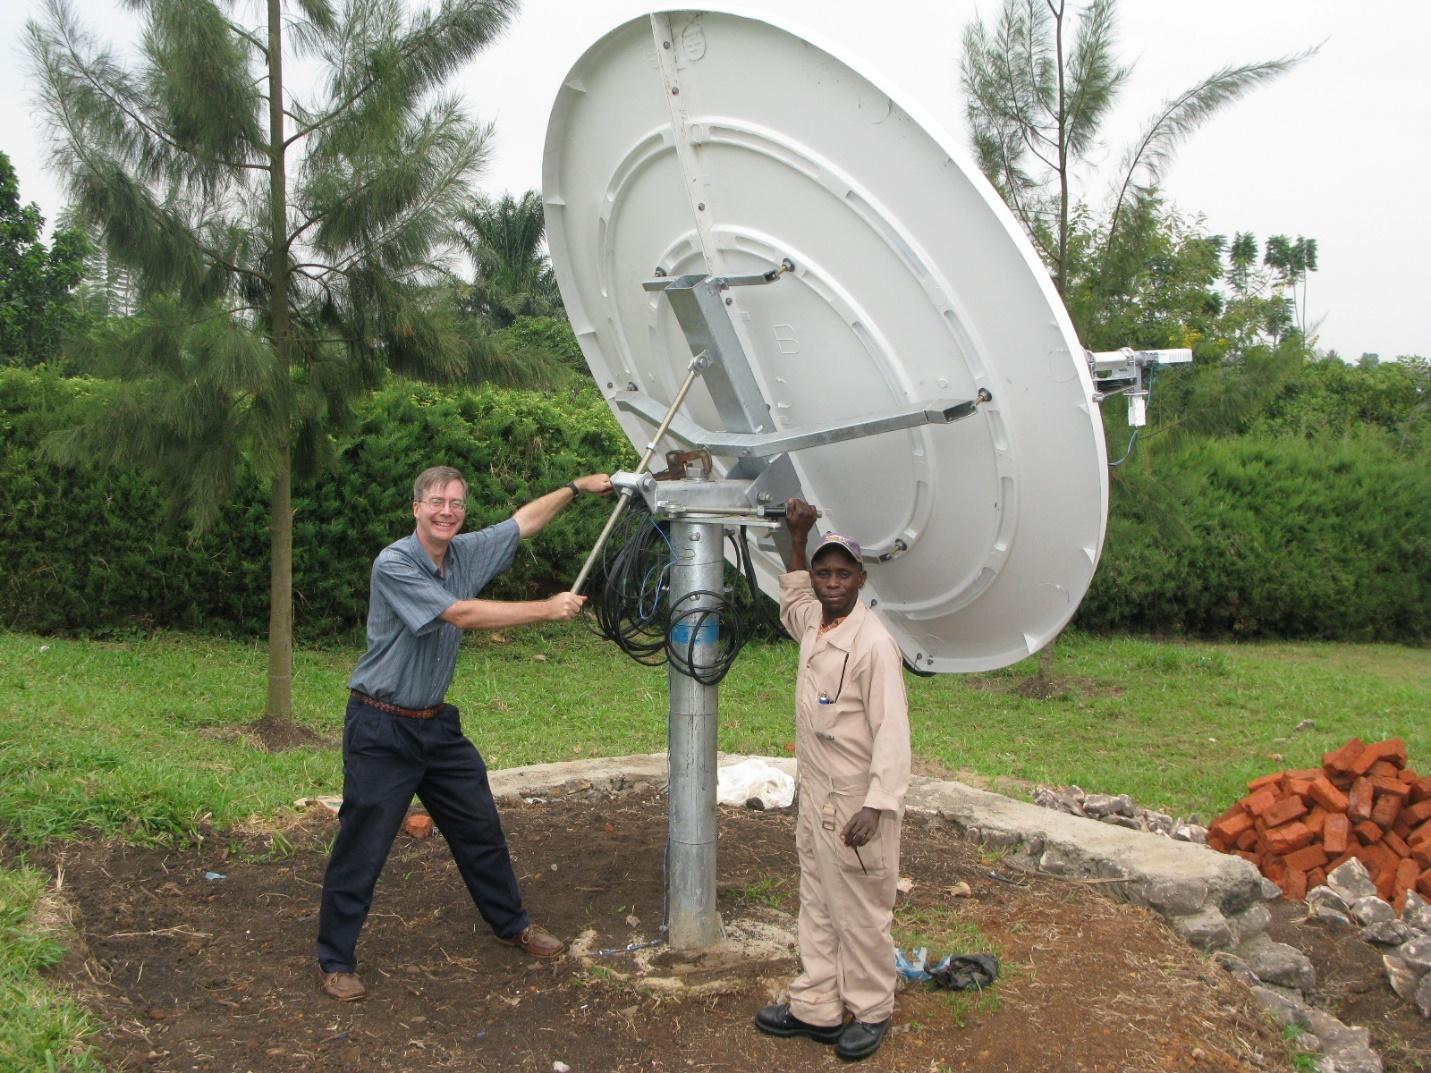 Men working on a satellite dish

Description automatically generated